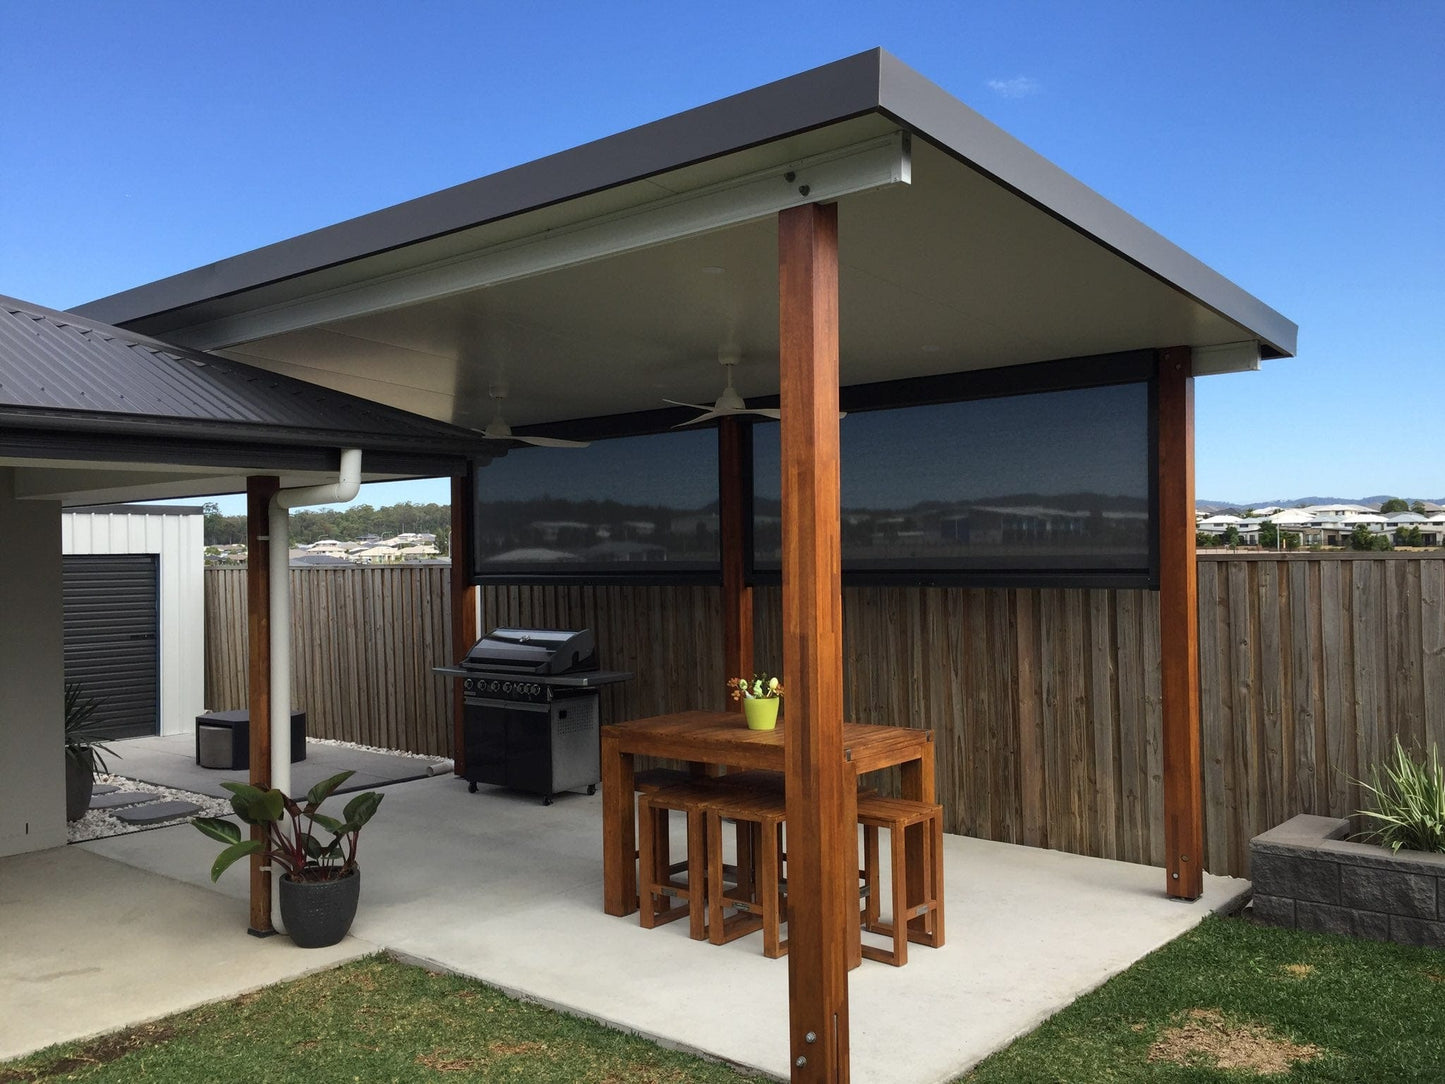 Insulated Flyover Patio Roof- 8m x 3m- Supply & Install QHI National